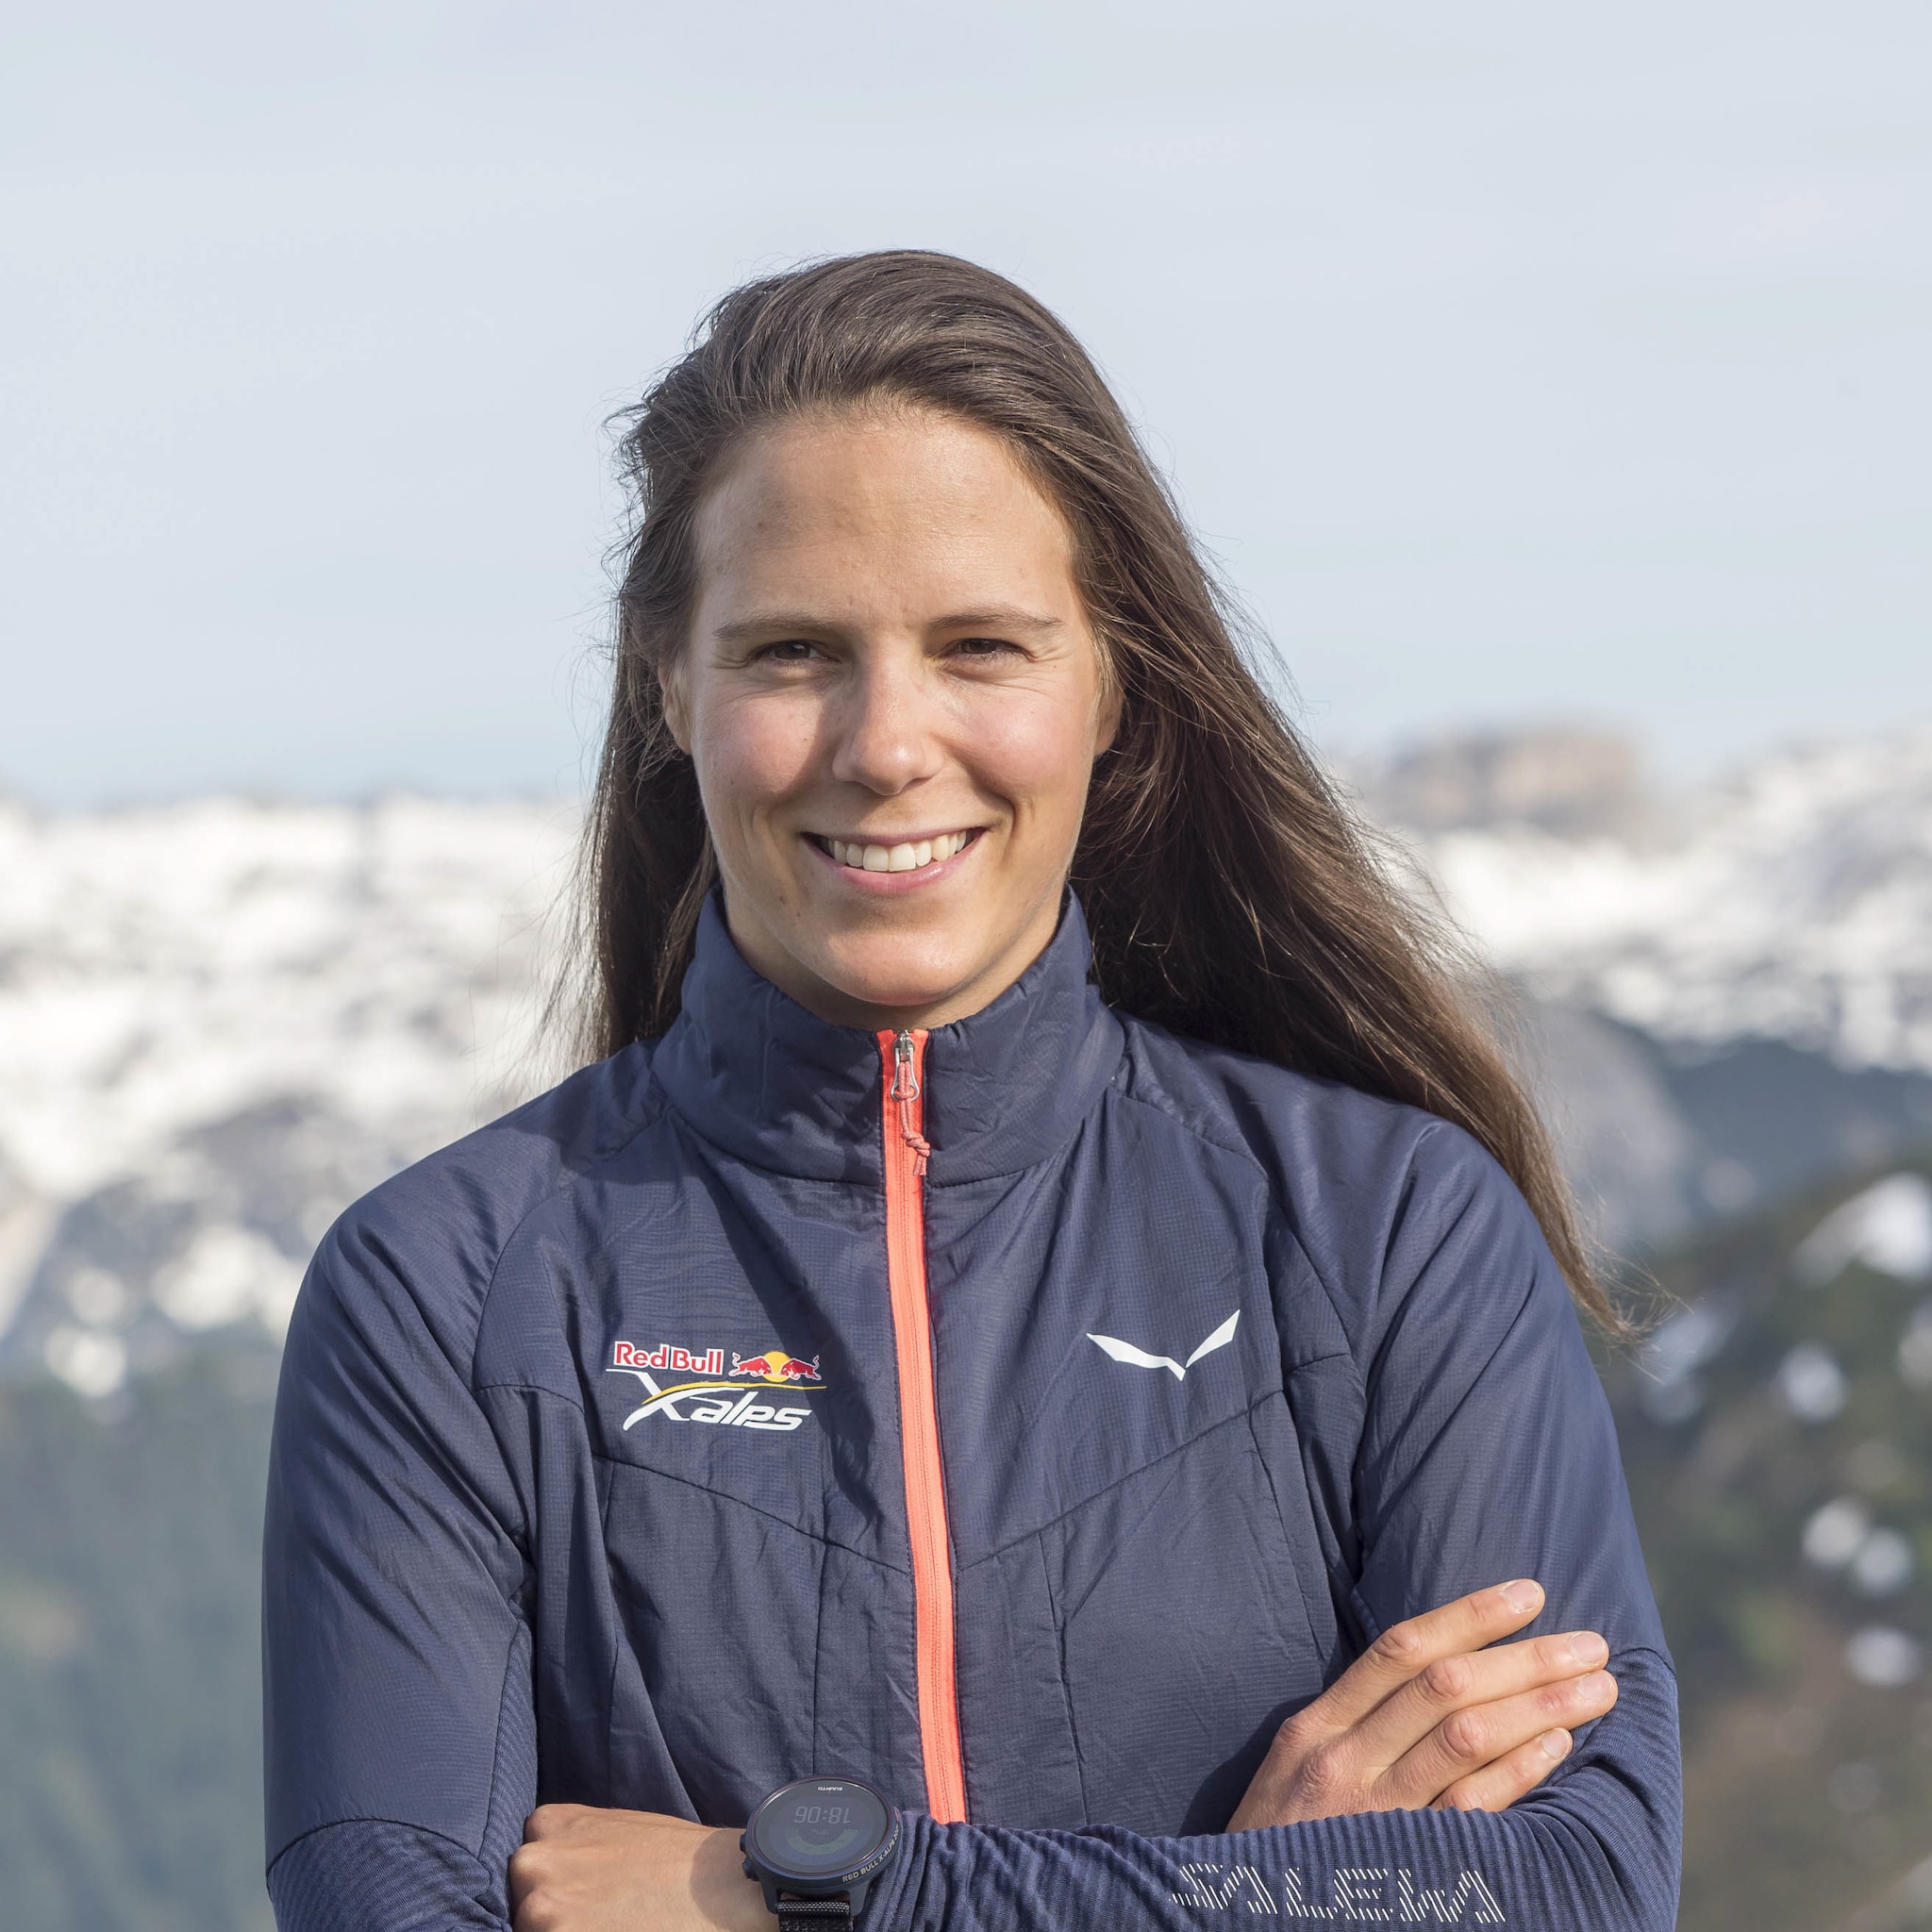 Yael Margelisch (SUI4) poses for portrait during Red Bull X-Alps 2021 preparations in Wagrain, Austria on August 15, 2021